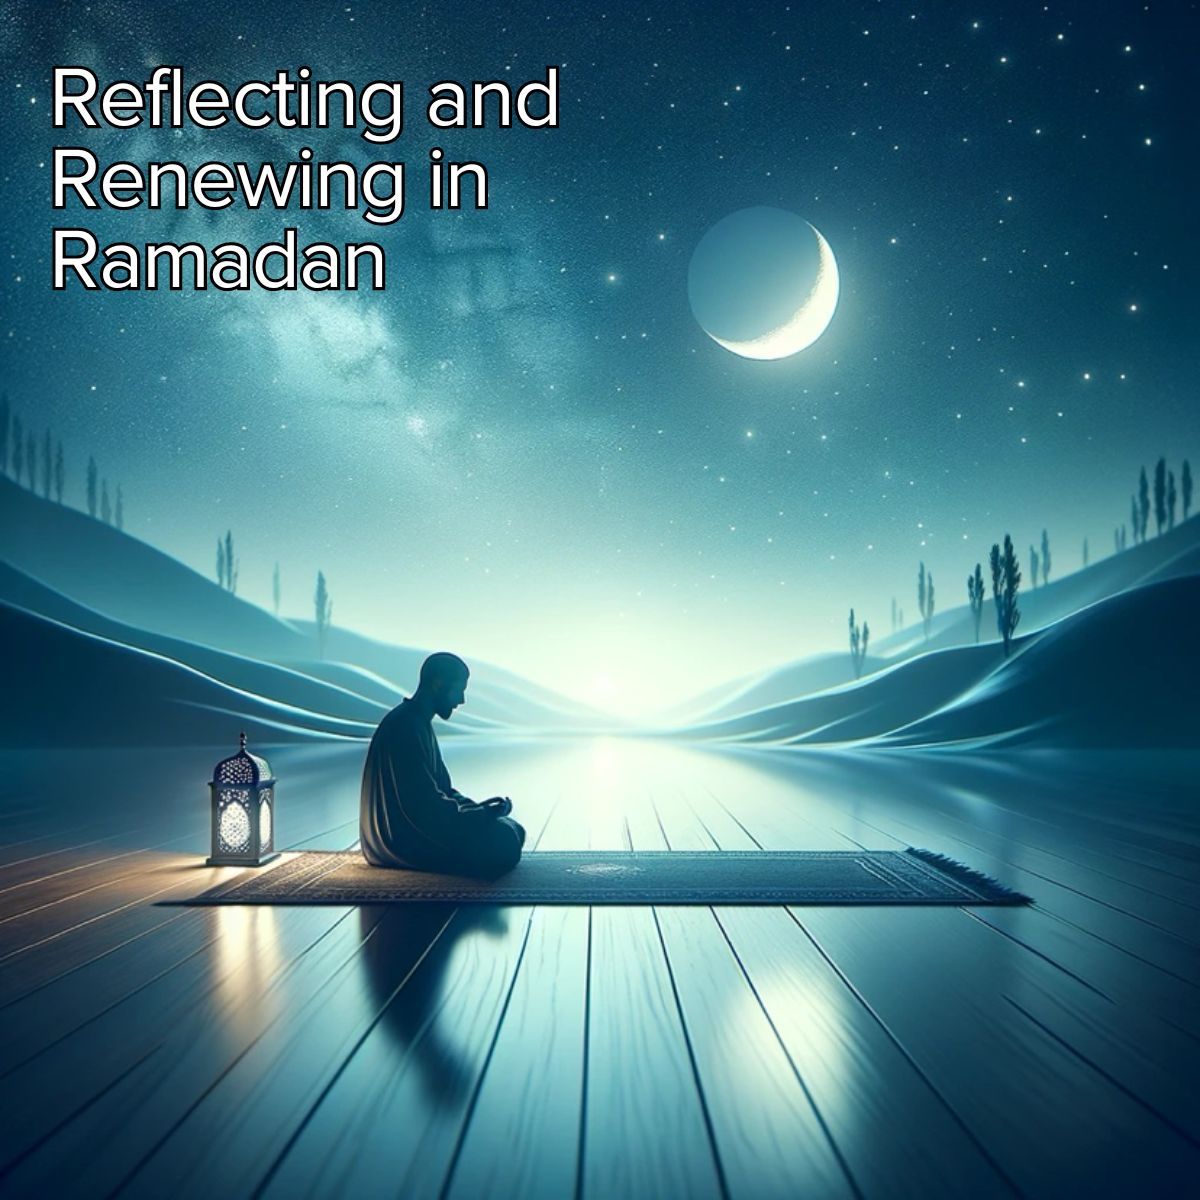 Reflecting and Renewing in Ramadan - This holy month is a chance to reflect on our lives, make amends, and set forth on a path of righteousness and peace.
#Ramadan #lifereflection